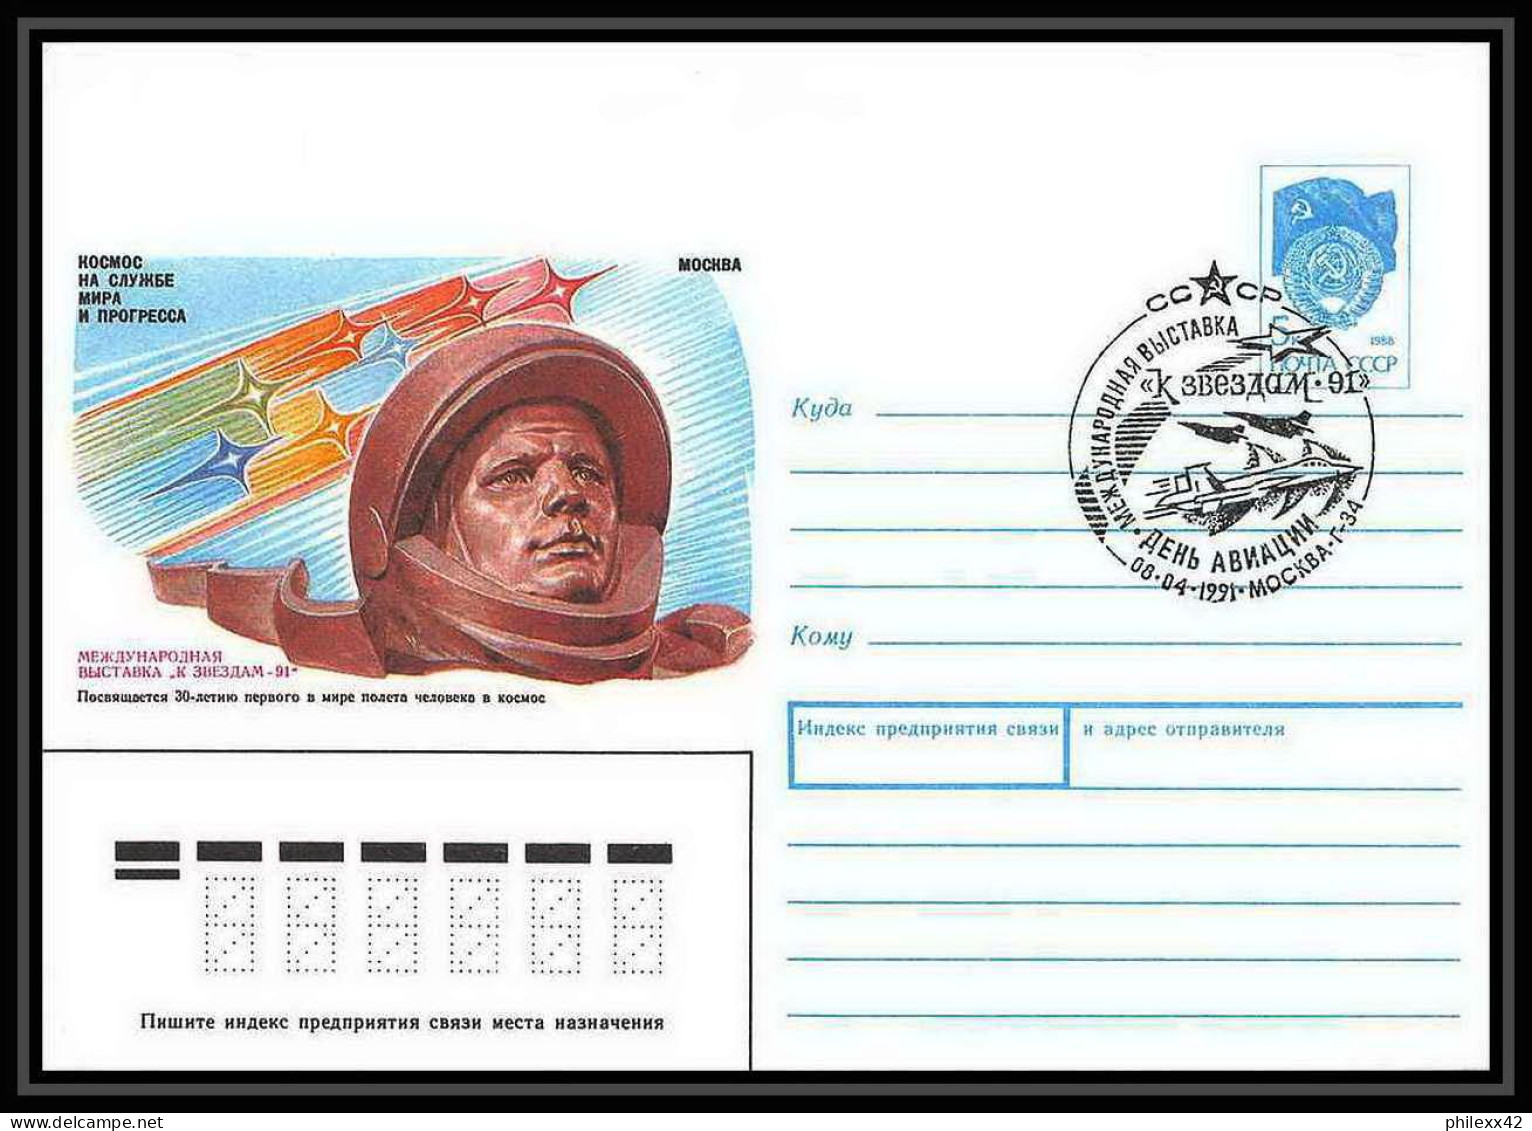 10255/ Espace (space) Entier Postal (Stamped Stationery) 8/4/1991 Gagarine Gagarin (urss USSR) - Russia & USSR